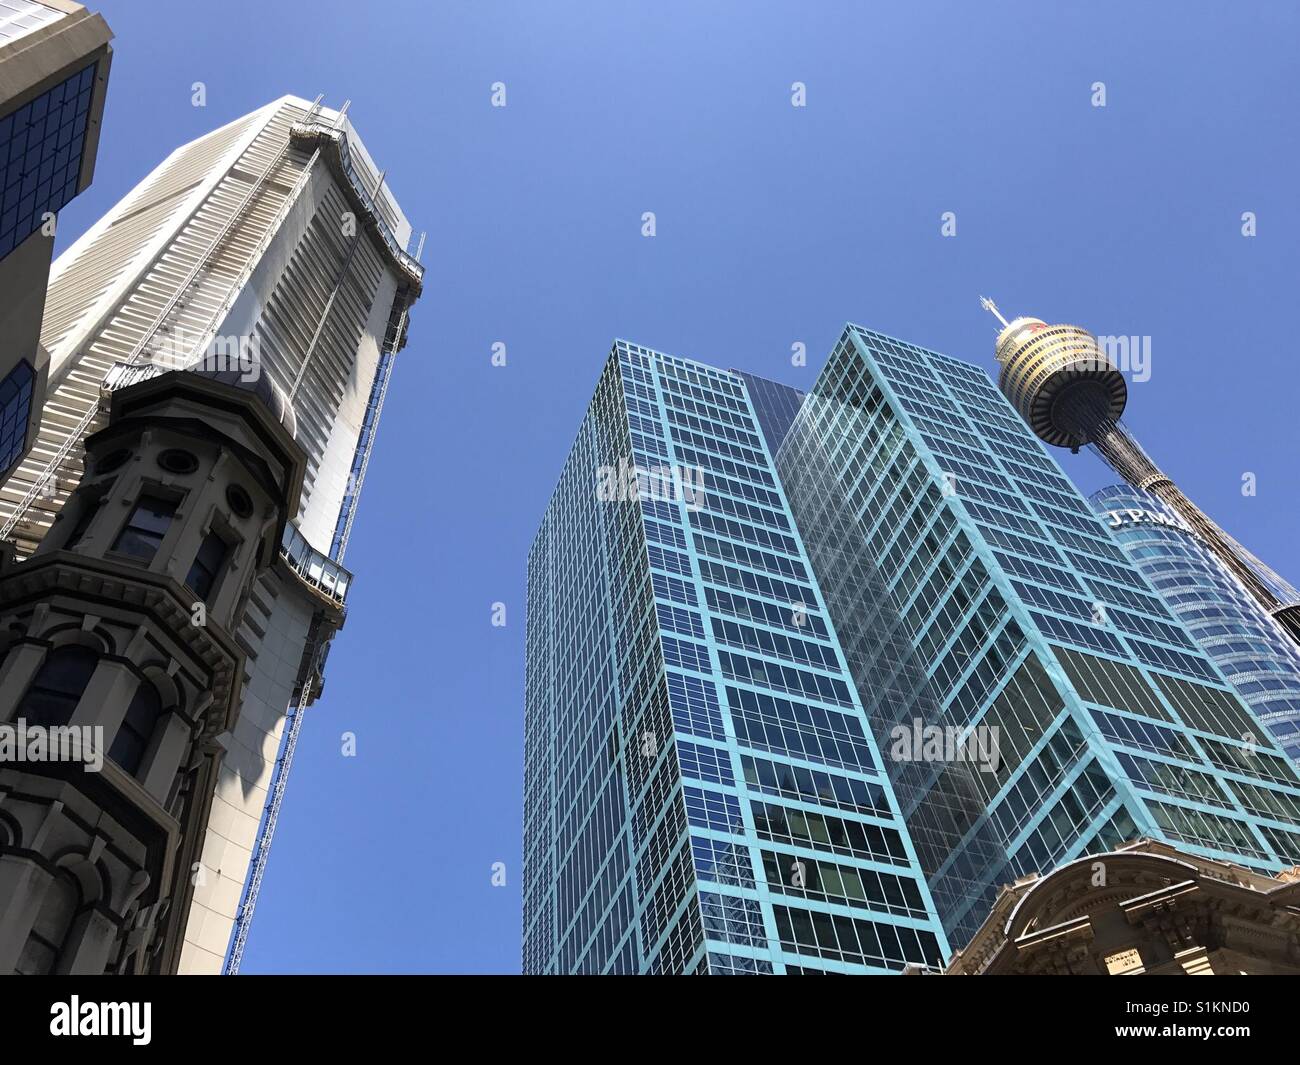 Old and new buildings, Sydney Stock Photo